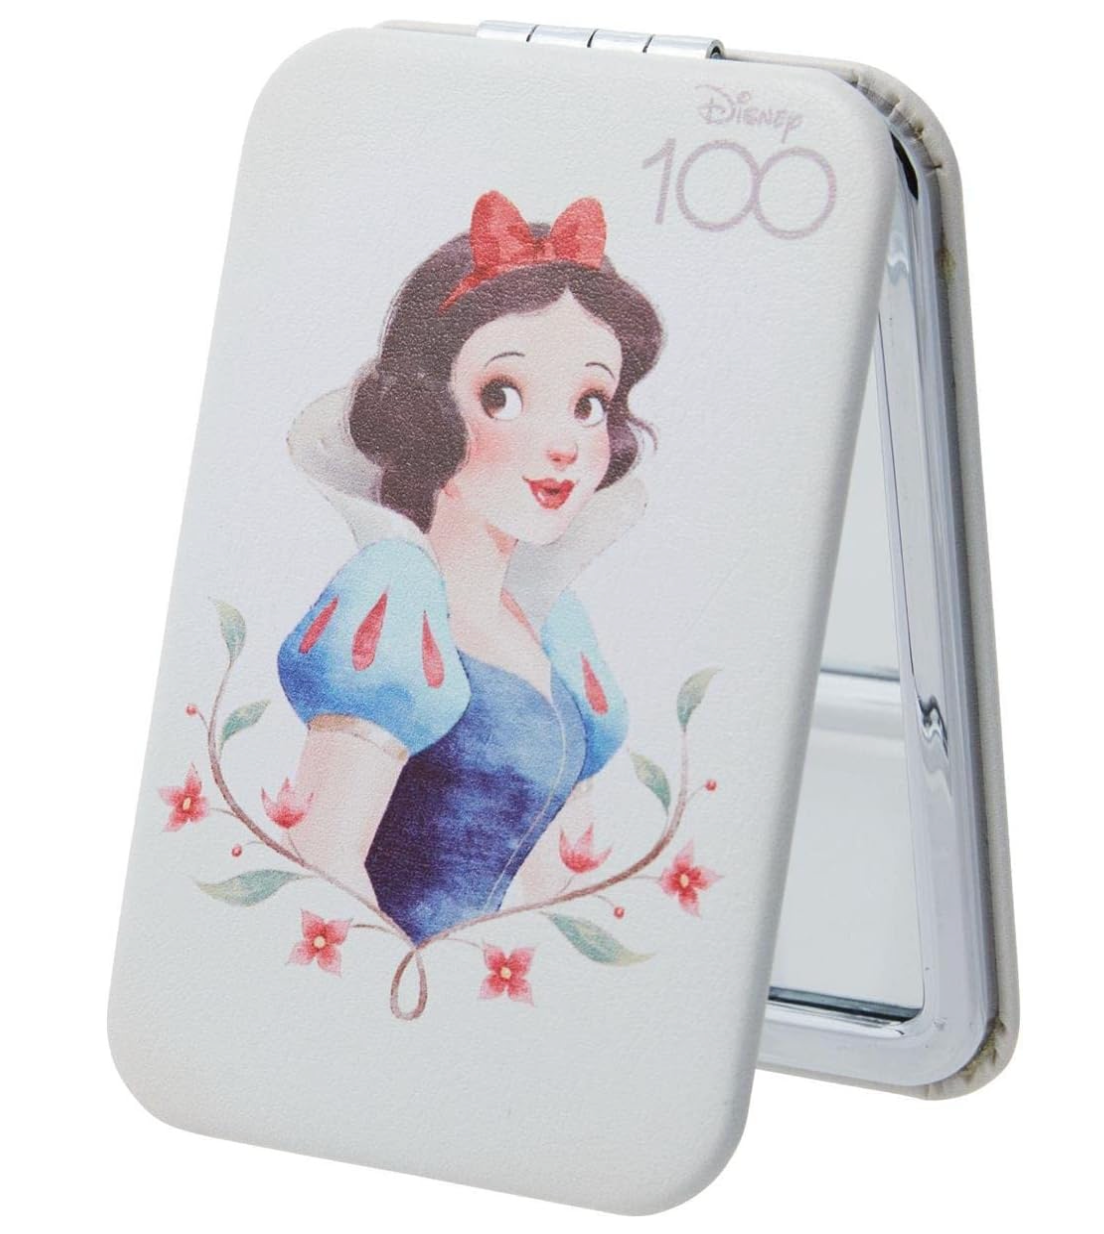 Hallmark Disney 100 Years of Wonder Snow White Compact Mirror New with Tag